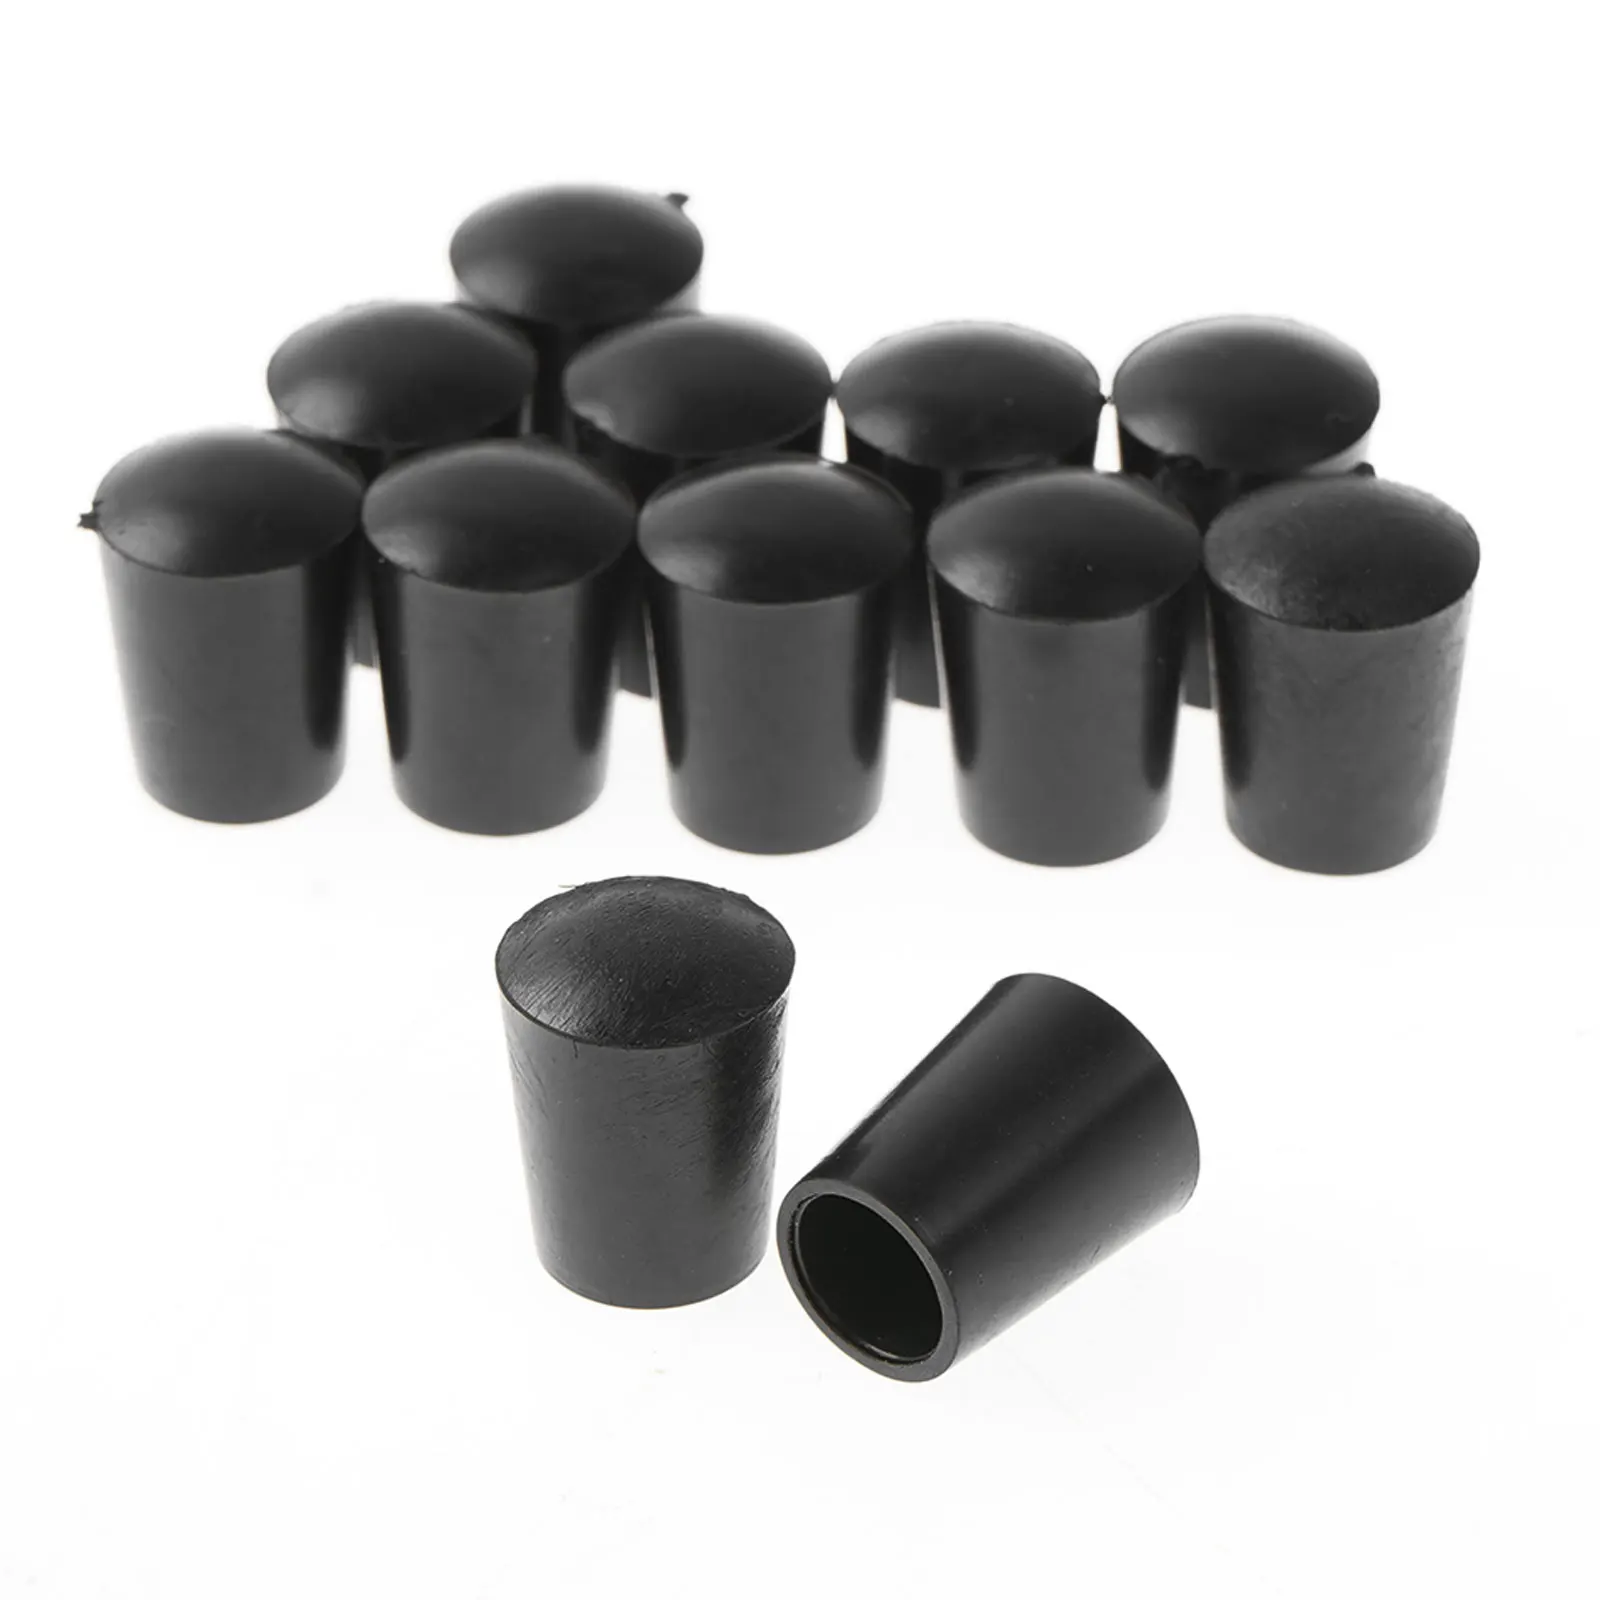 12x Rubber Furniture Foot Table Chair Leg End Caps Covers Tips Floor Protectors 